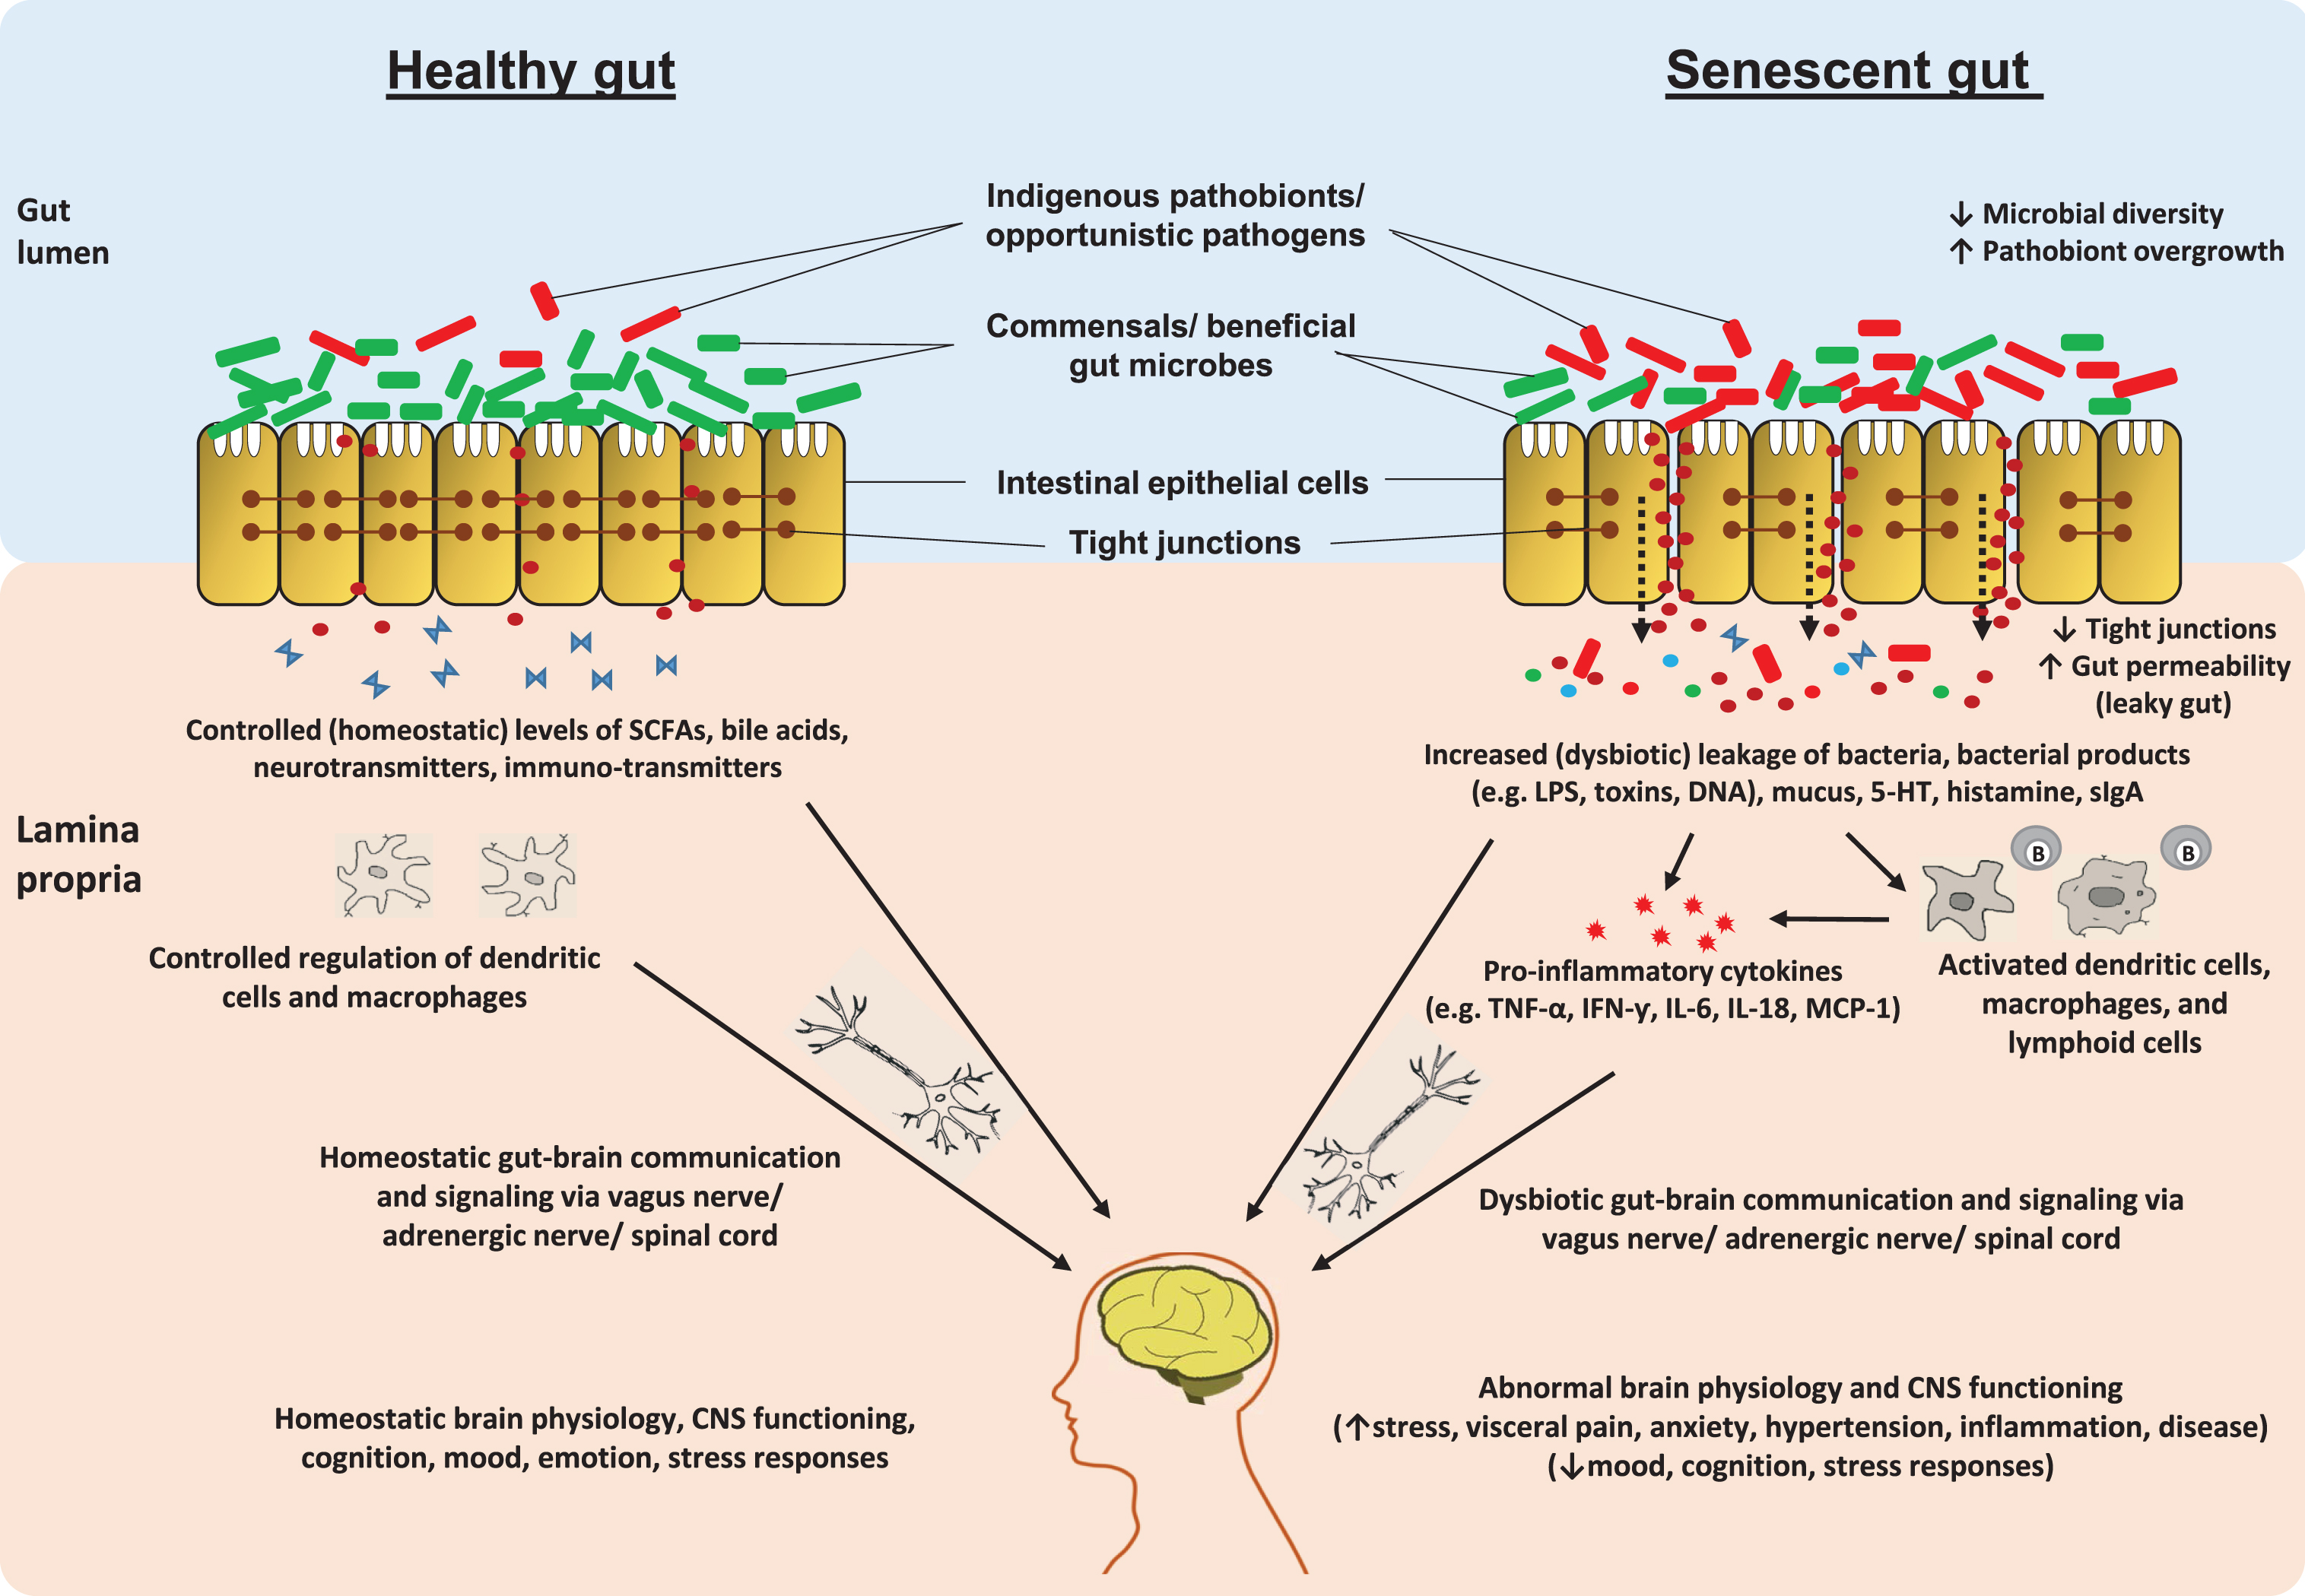 Schematic illustration of putative pathway(s) by which aging-related alterations in gut microbiome and entero-neuro-endocrine system may affect brain health via deteriorated gut-brain communication signaling. In healthy adult host, the balanced gut microbiome configuration and intestinal barrier integrity help in maintaining balanced arrays of microbes, microbial by-products (e.g. short-chain fatty acids; SCFAs) and other entities such as neurotransmitters across the gut wall thereby maintaining a balanced enteric-immune and -inflammatory system through controlled proliferation of dendritic cells and macrophages which eventually helps in keeping the gut-brain communication and the functioning of central nervous system (CNS) under control. In old age, the altered gut microbiota diversity and weakened gut barrier integrity may perturb the microbial and biochemical environment across the intestinal epithelial cell lining via abnormal levels of SCFAs, lipopolysaccharide (LPS), secretory Immunoglobulin A (sIgA), histamins, serotonin (5-hydroxytryptamine; 5-HT), etc. thereby instigating an abnormal (hyper) inflammatory responses eventually affecting (disturbing) the gut-brain communication [84, 90, 93, 103, 104, 109, 112, 124, 158].